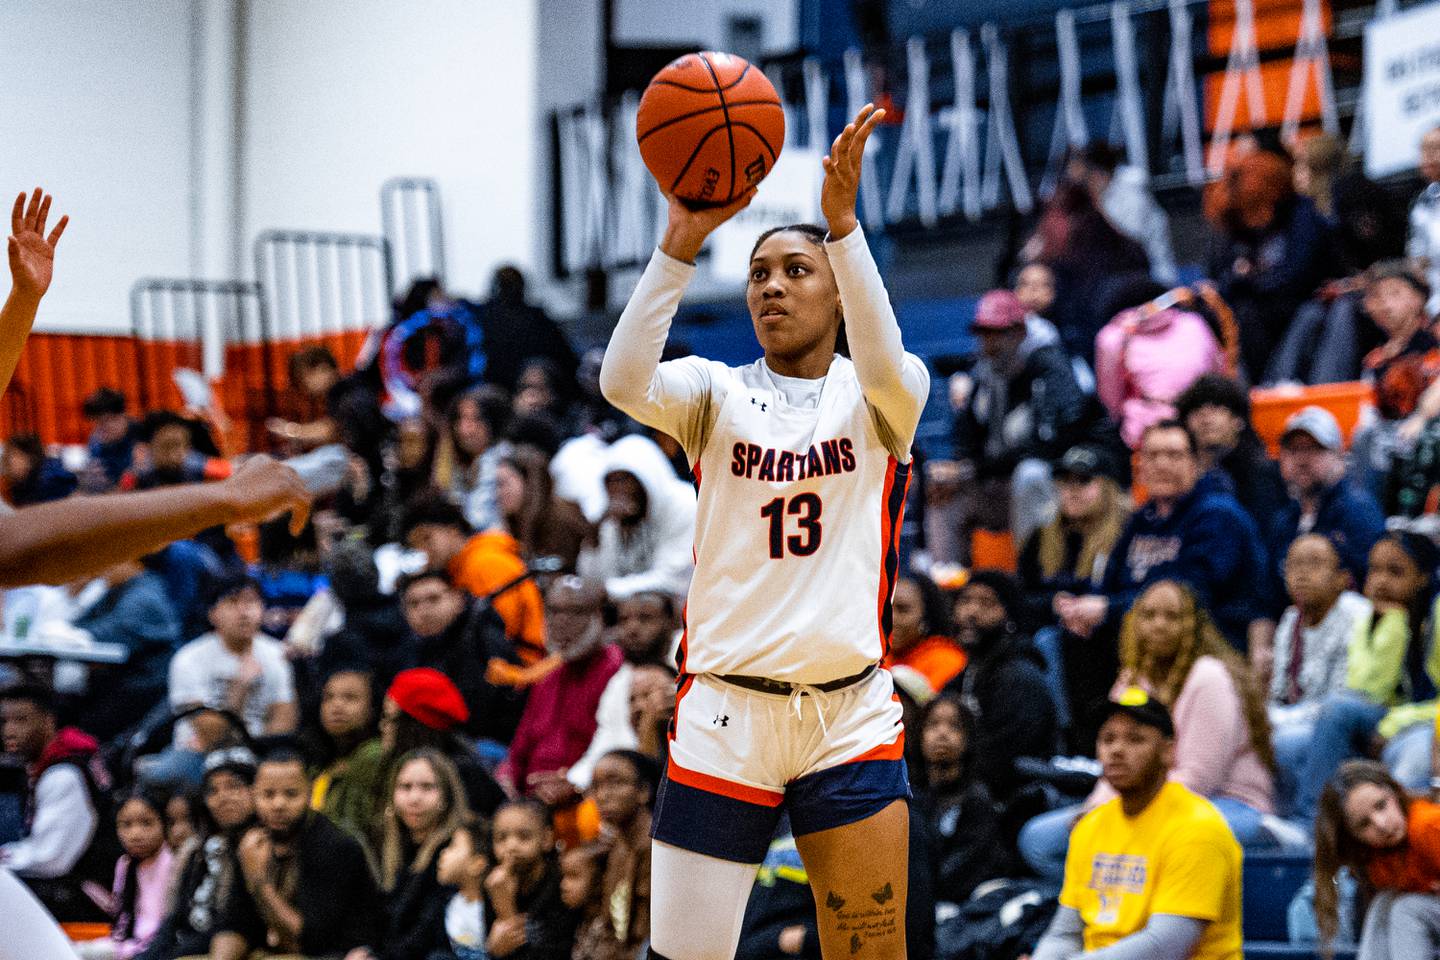 Romeoville's Jadea Johnson puts up a shot during a game against Joliet Central Friday Feb. 3, 2023 at Romeoville  High School